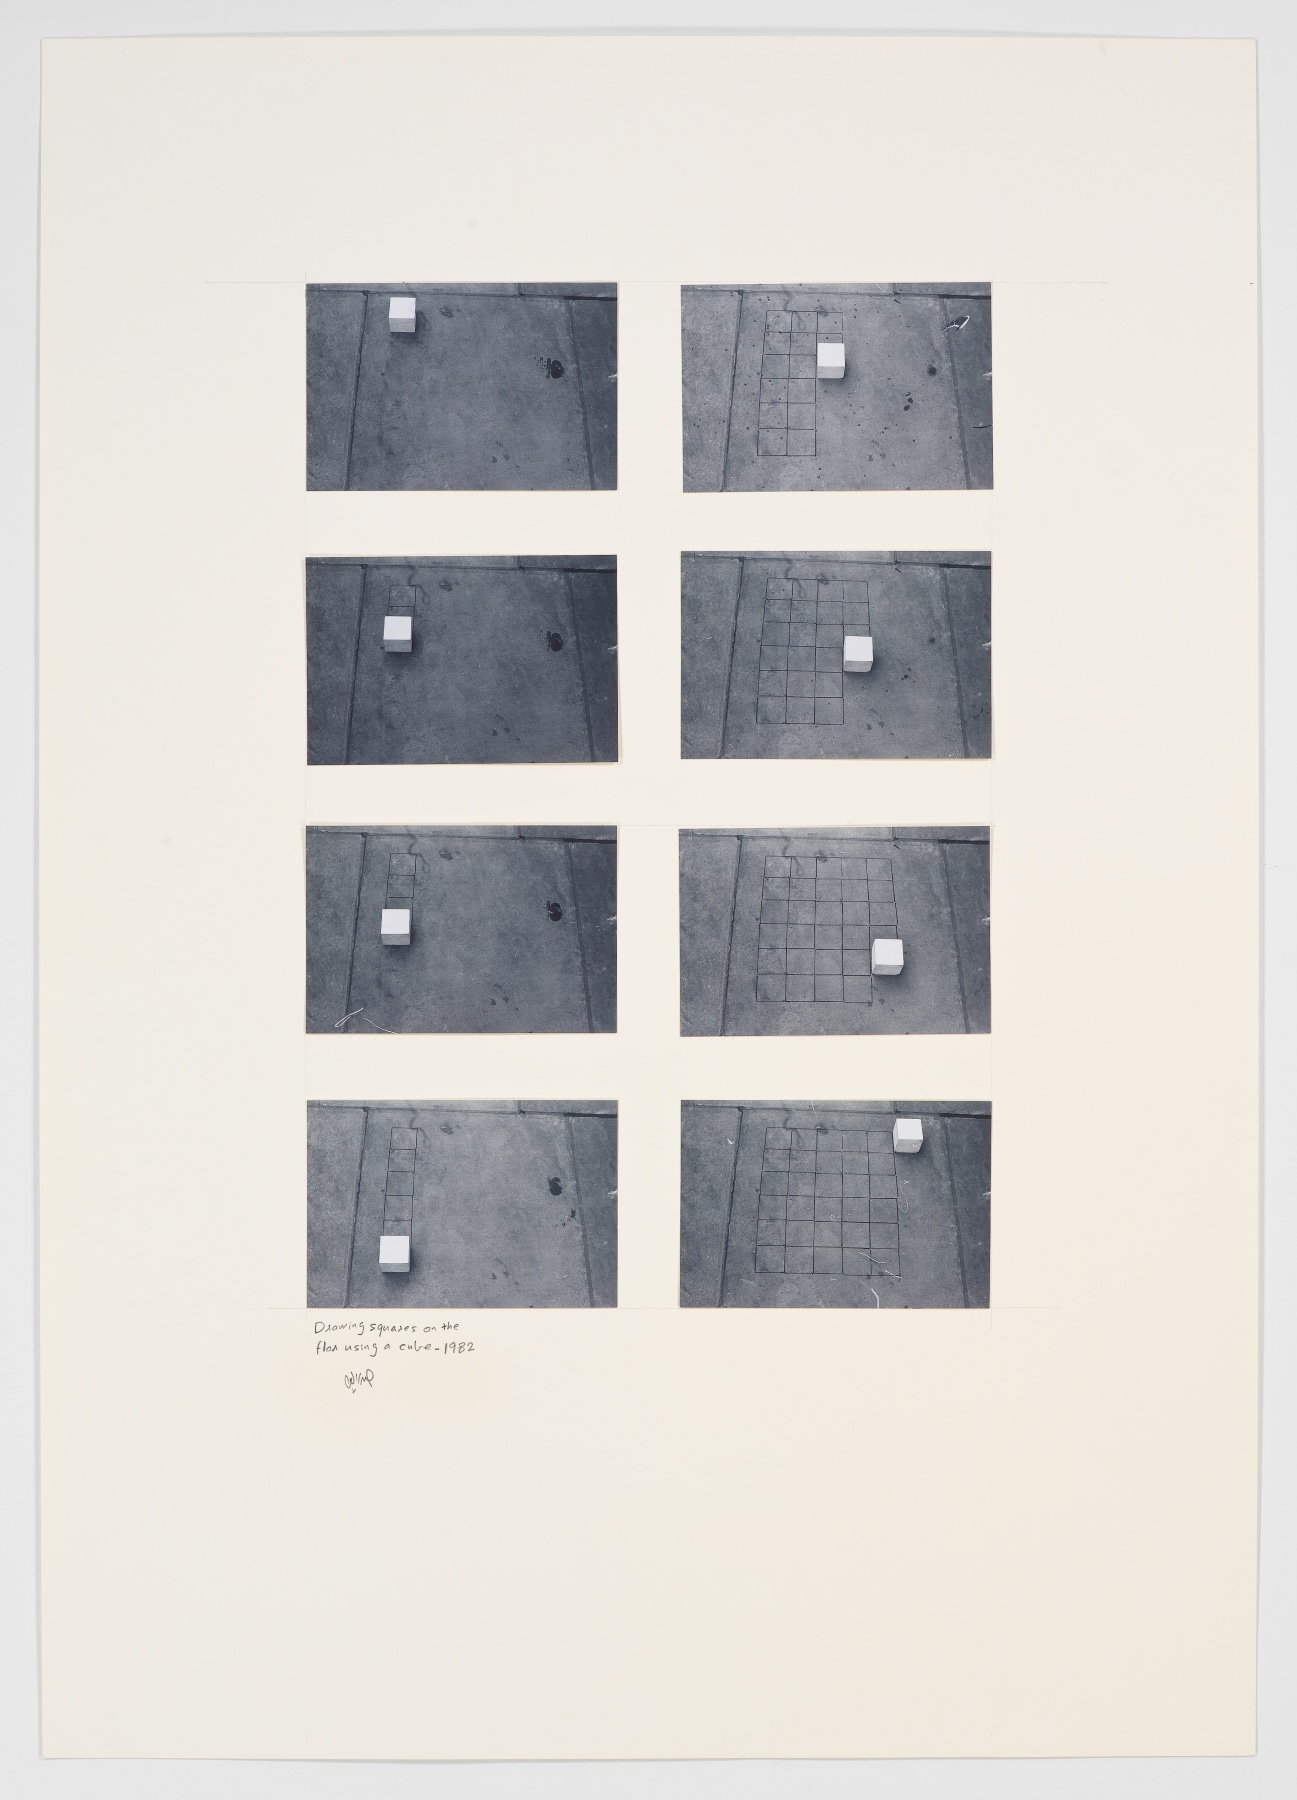 Drawing Squares on the Floor Using a Cube, 1982, Photographs on paperboard in 8 parts